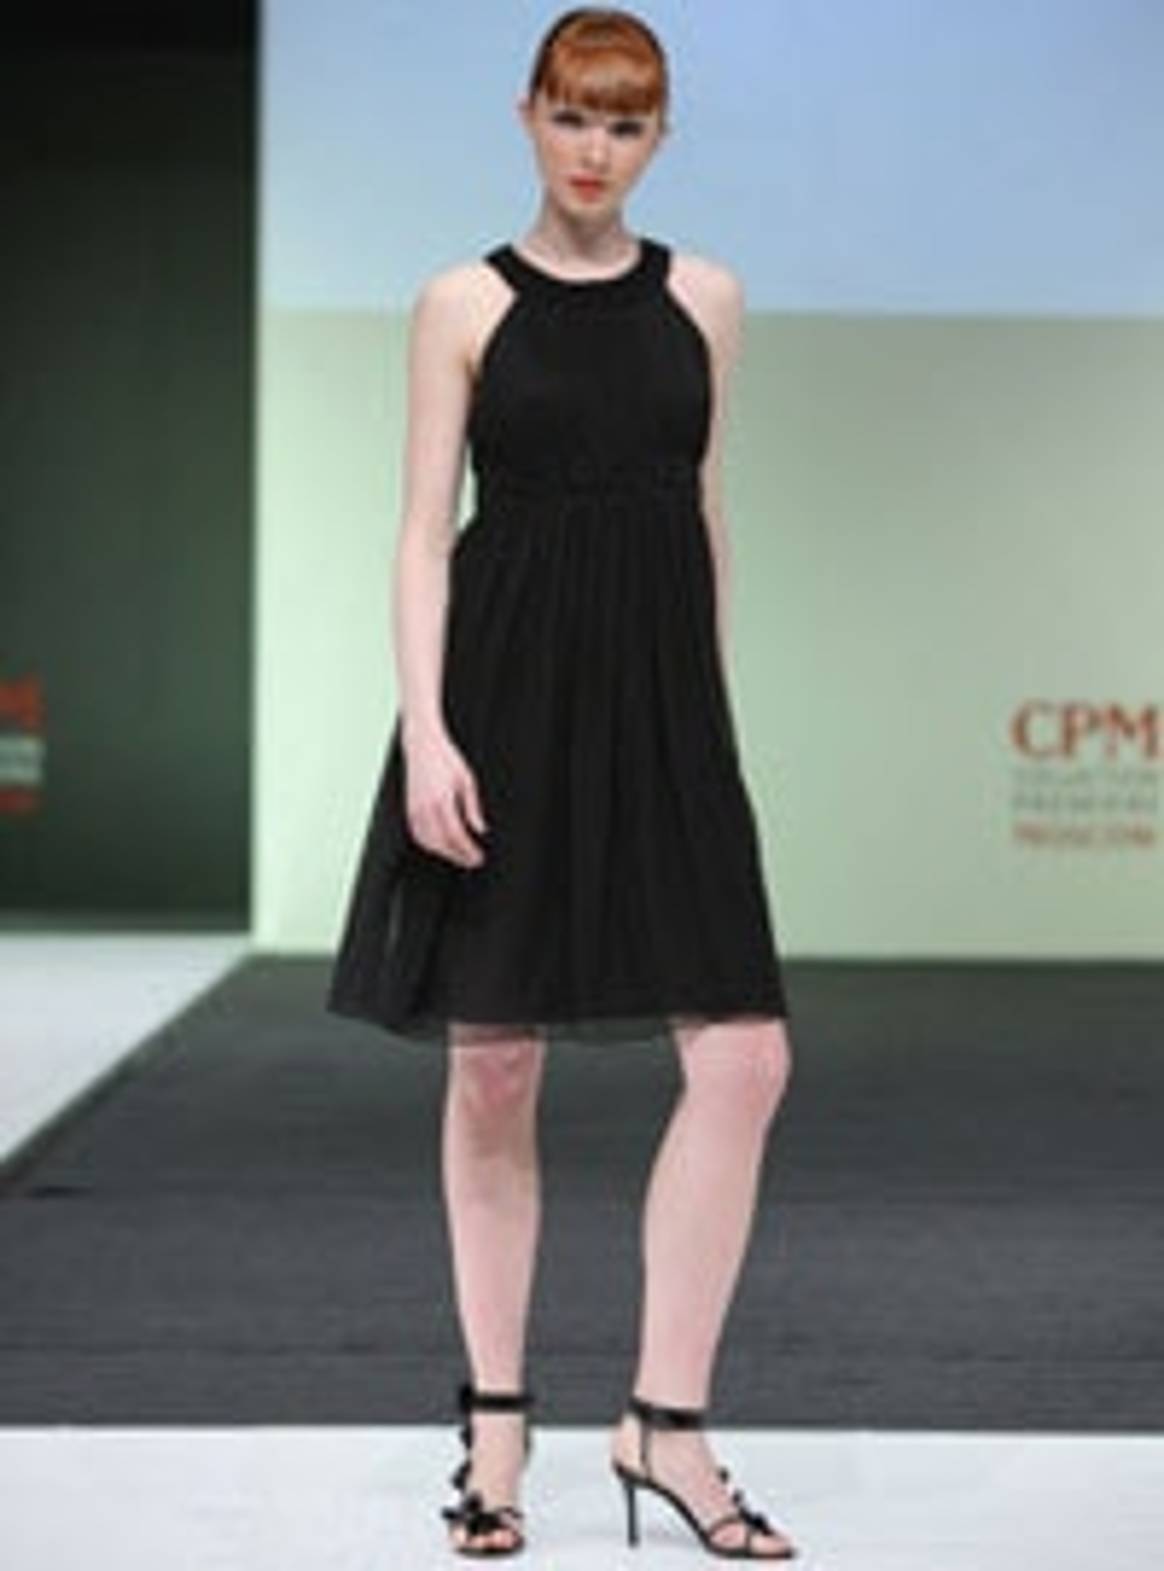 CPM Moscow